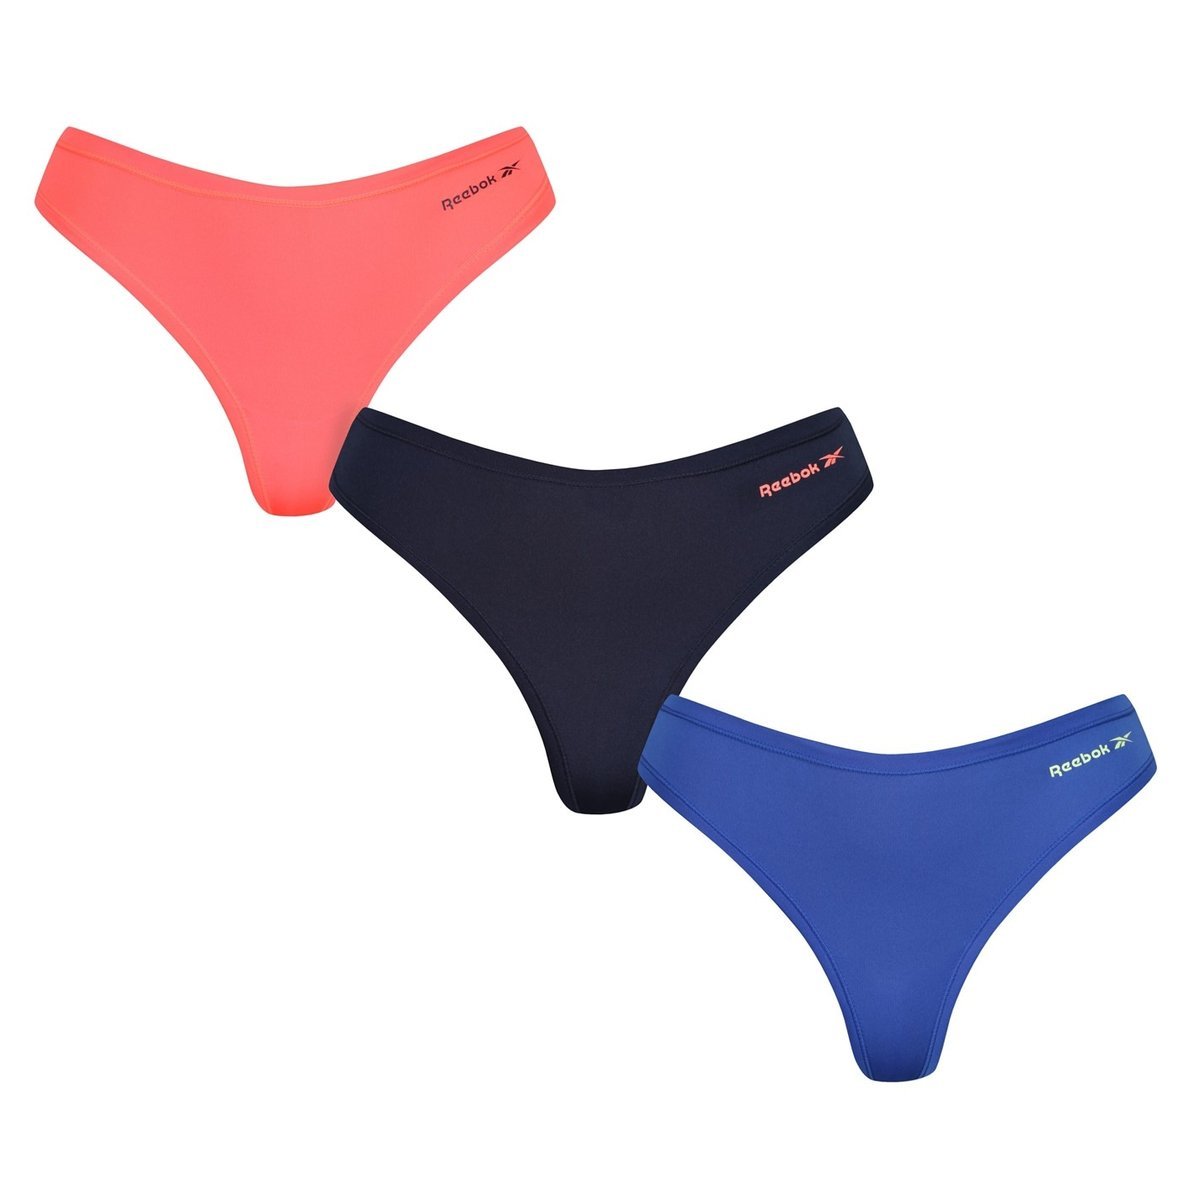 Reebok Carina 3 pack thongs in blue and pink